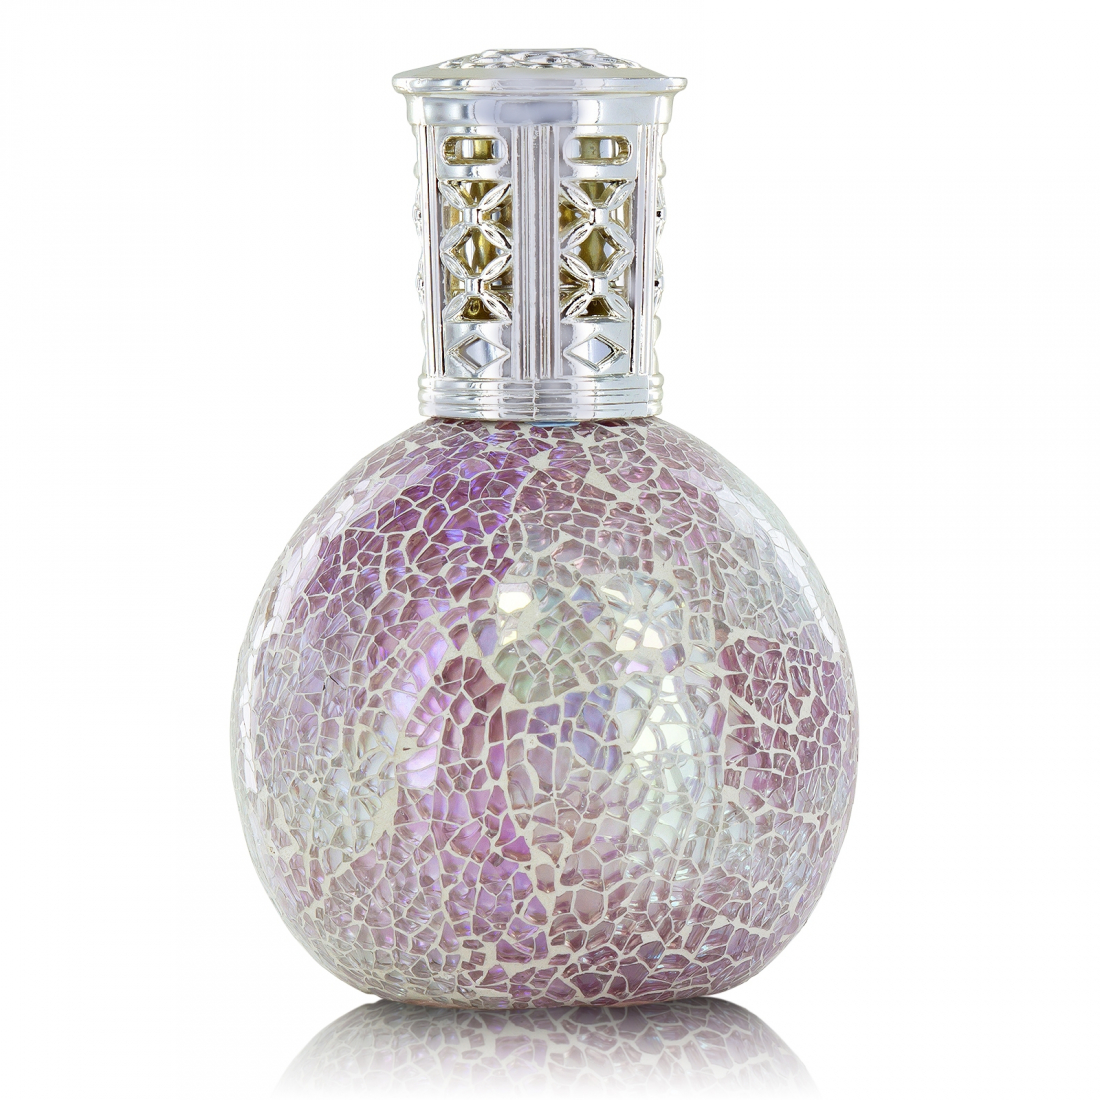 'Frosted Bloom Big' Fragrance Lamp